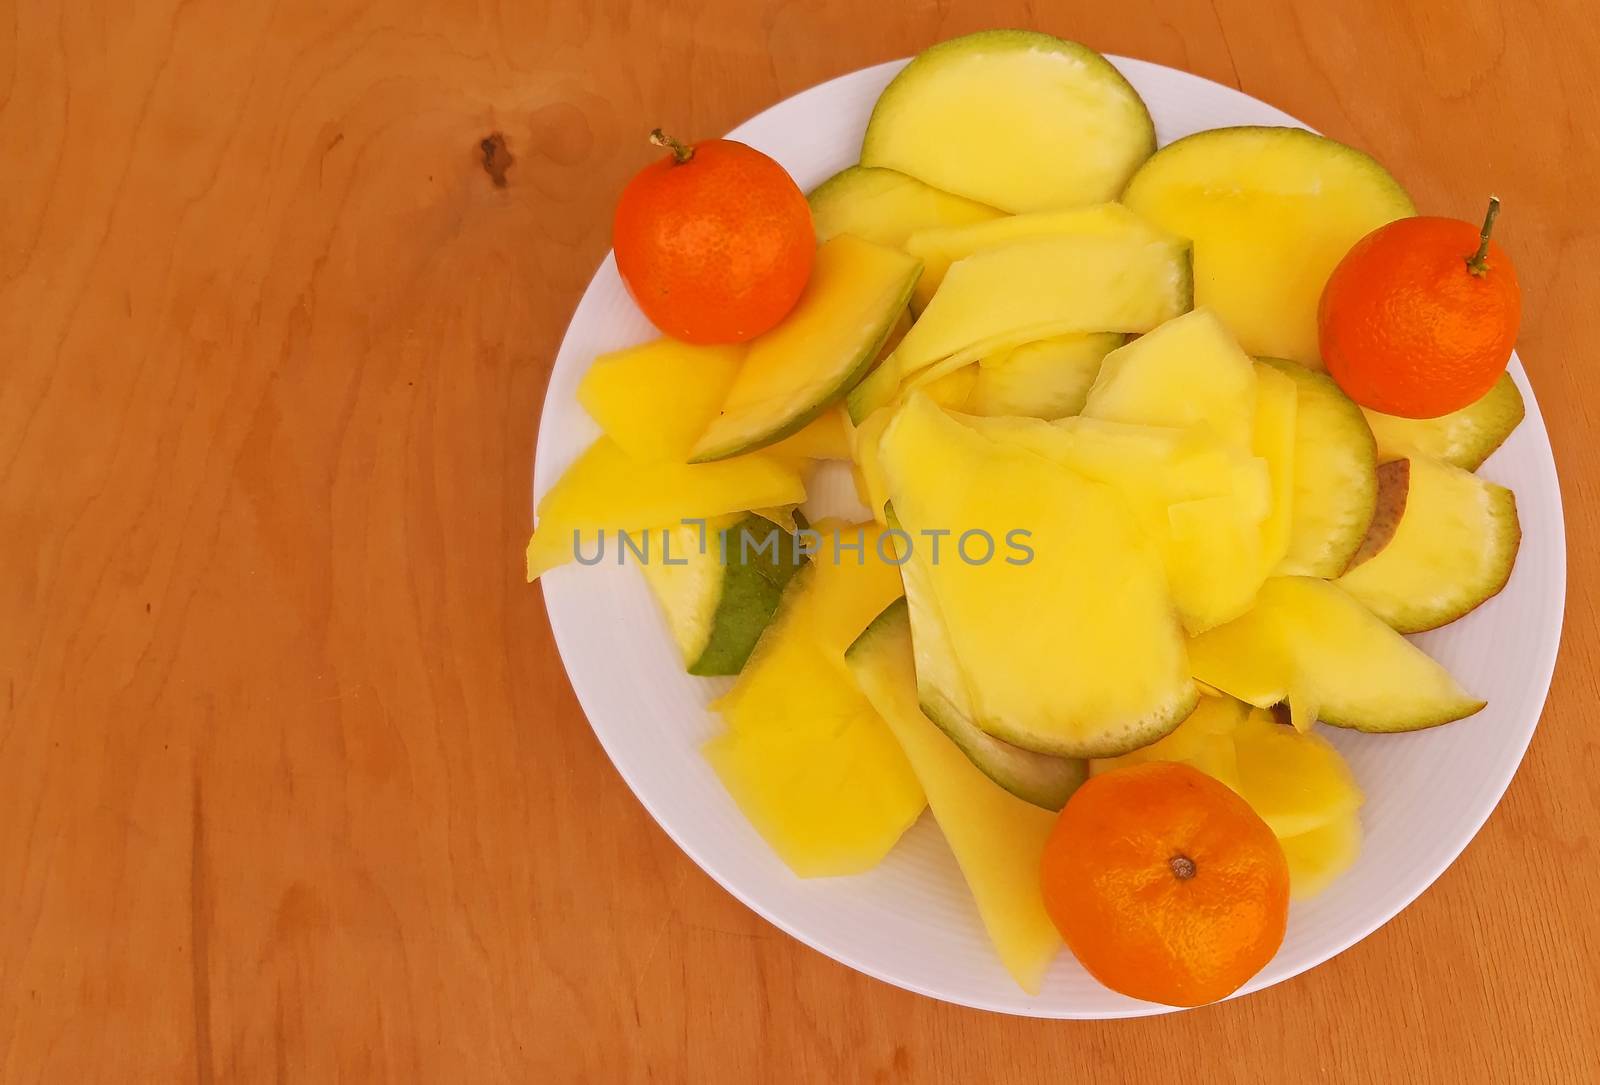 Sliced pineapple and clementines in a plate, wooden background.